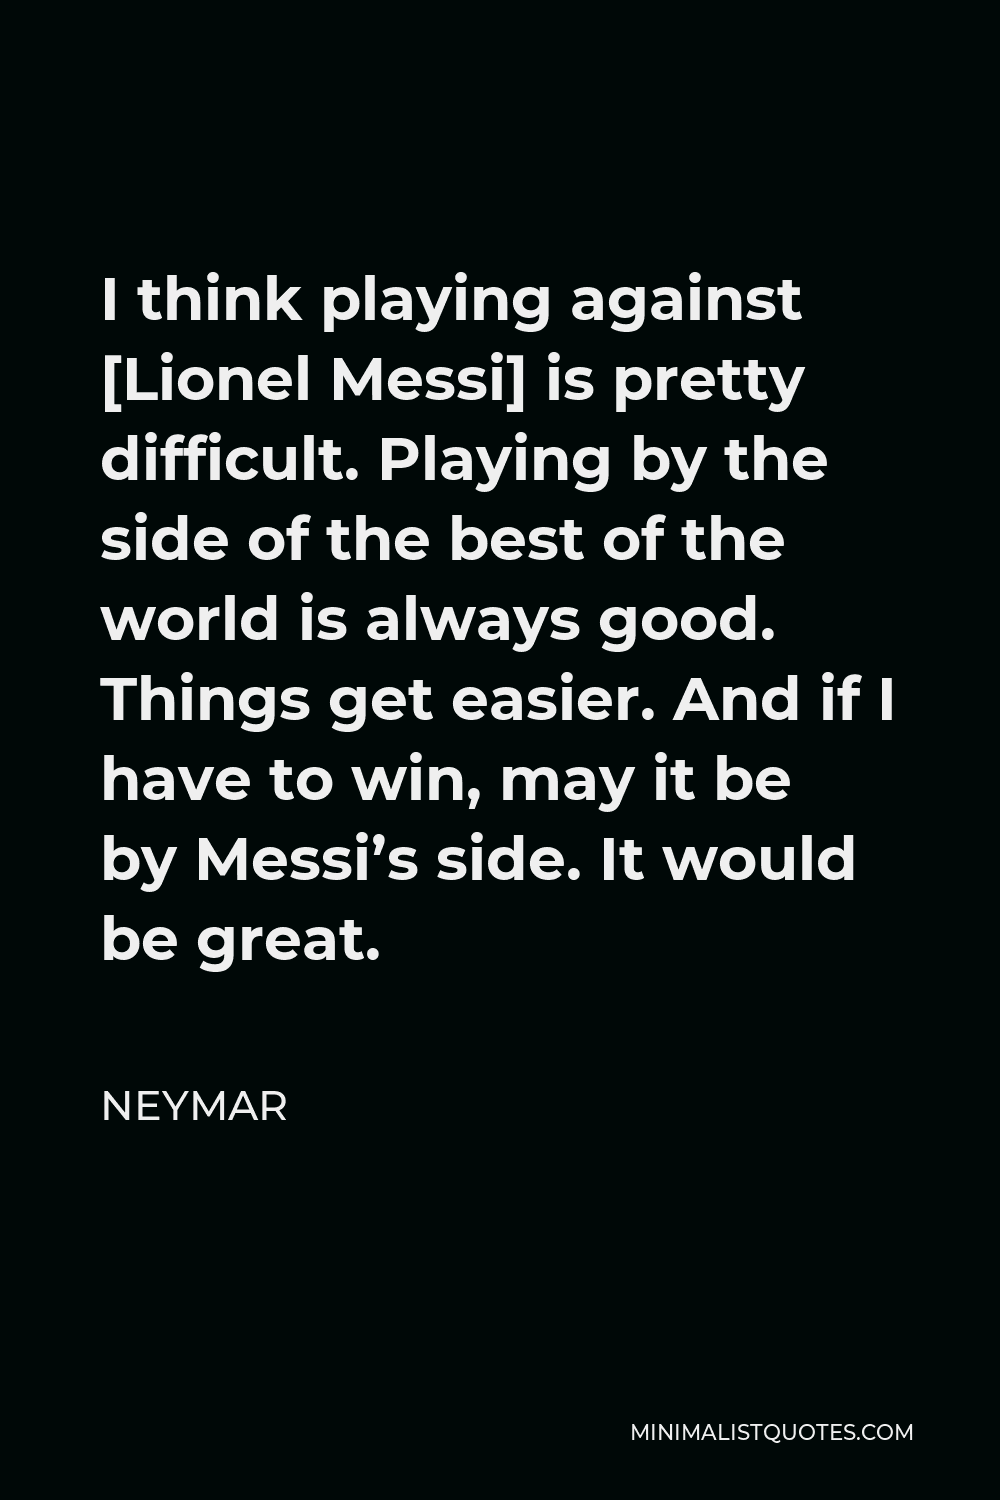 Neymar Quote - I think playing against [Lionel Messi] is pretty difficult. Playing by the side of the best of the world is always good. Things get easier. And if I have to win, may it be by Messi’s side. It would be great.